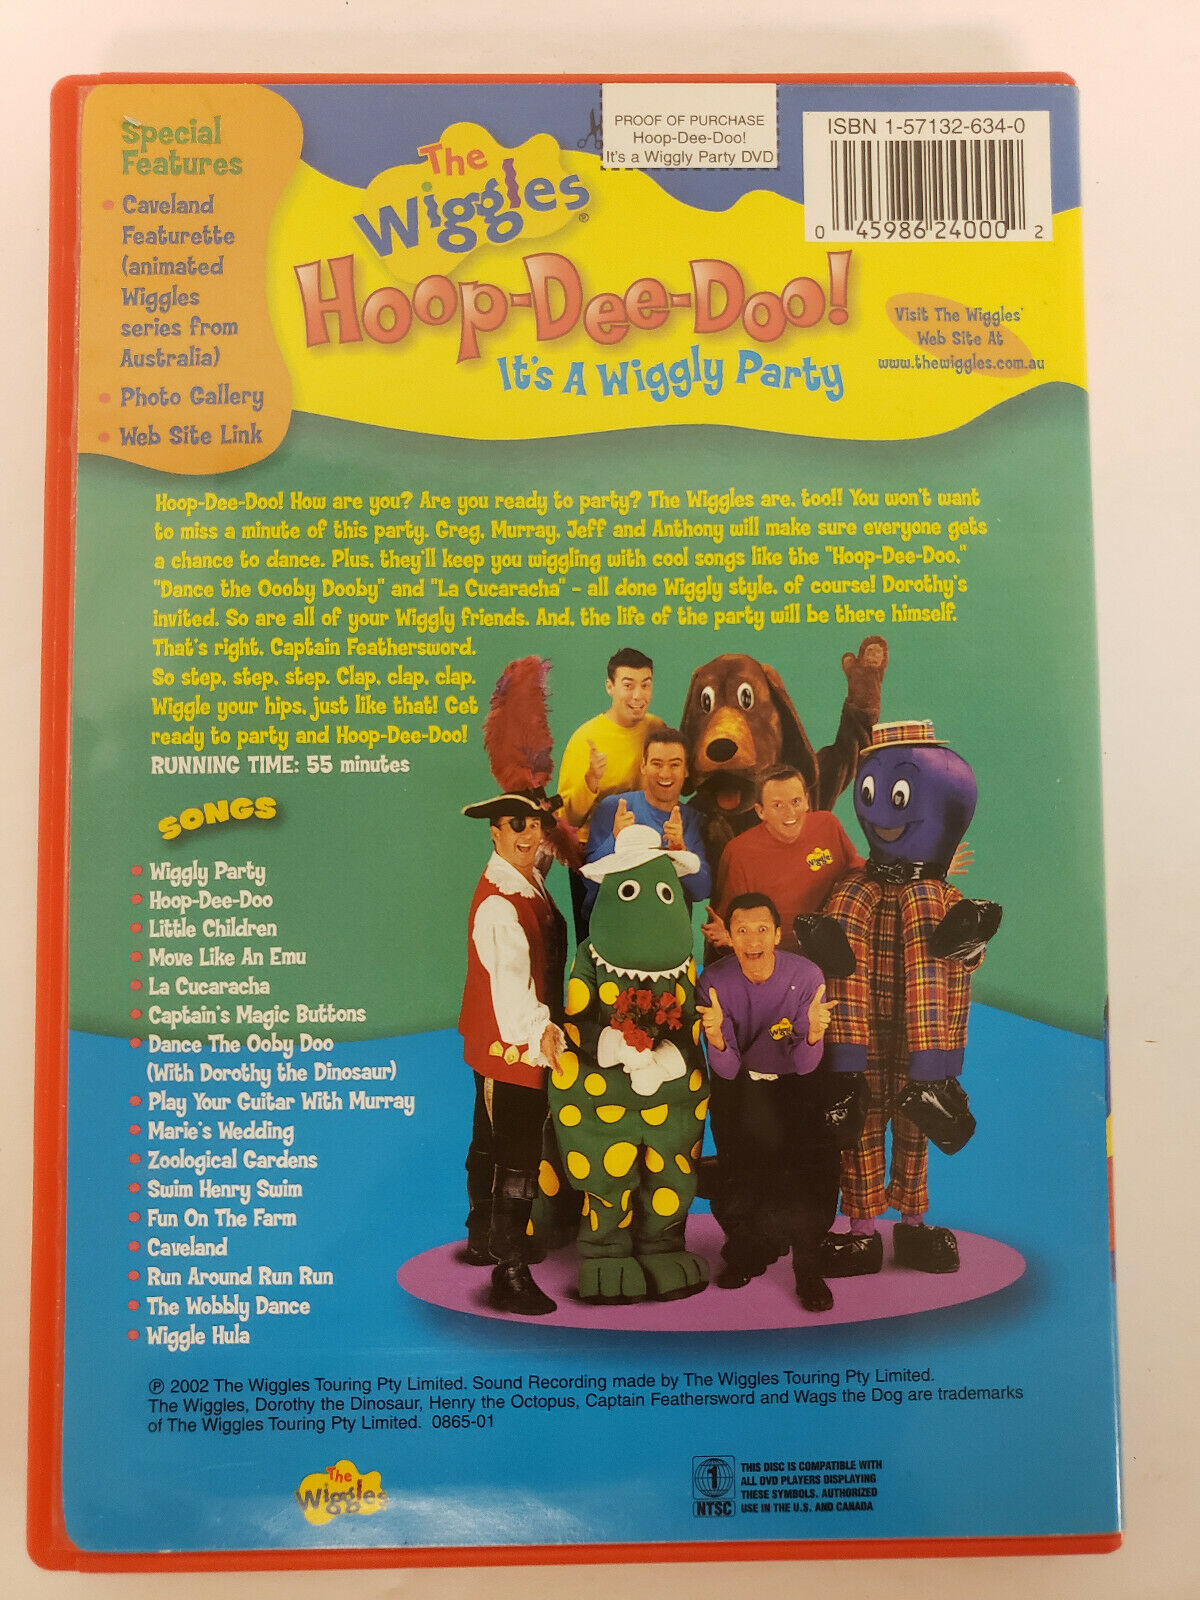 DVD Wiggles HoopDee Doo ©2002 The Wiggles Touring Party Songs